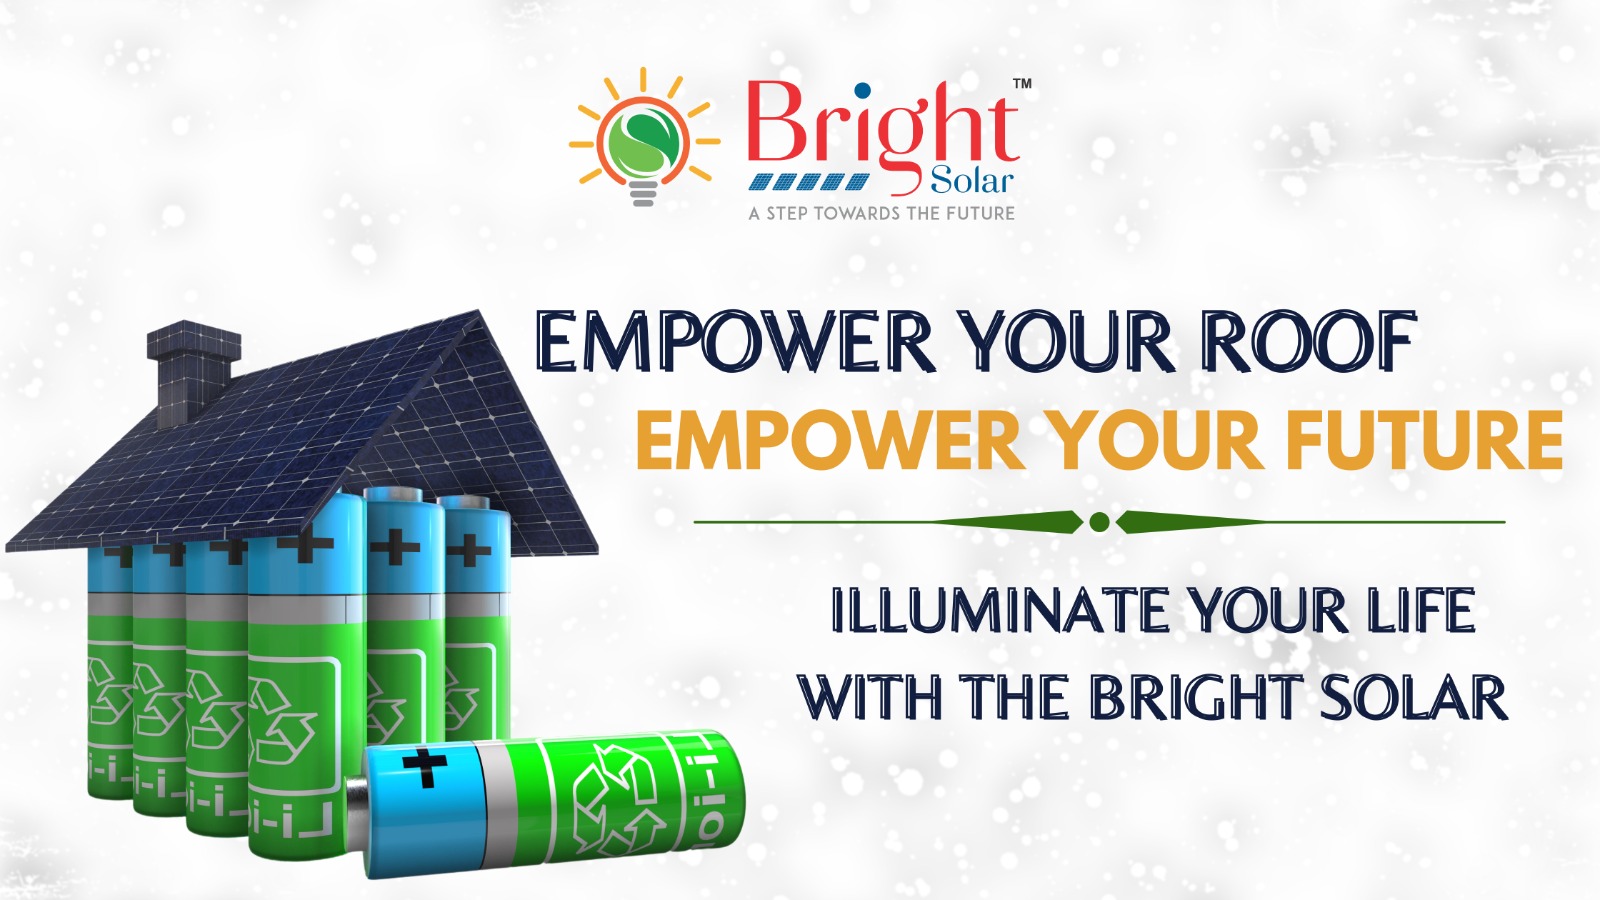 Empower Your Roof, Empower Your Future: Illuminate Your Life with The Bright Solar